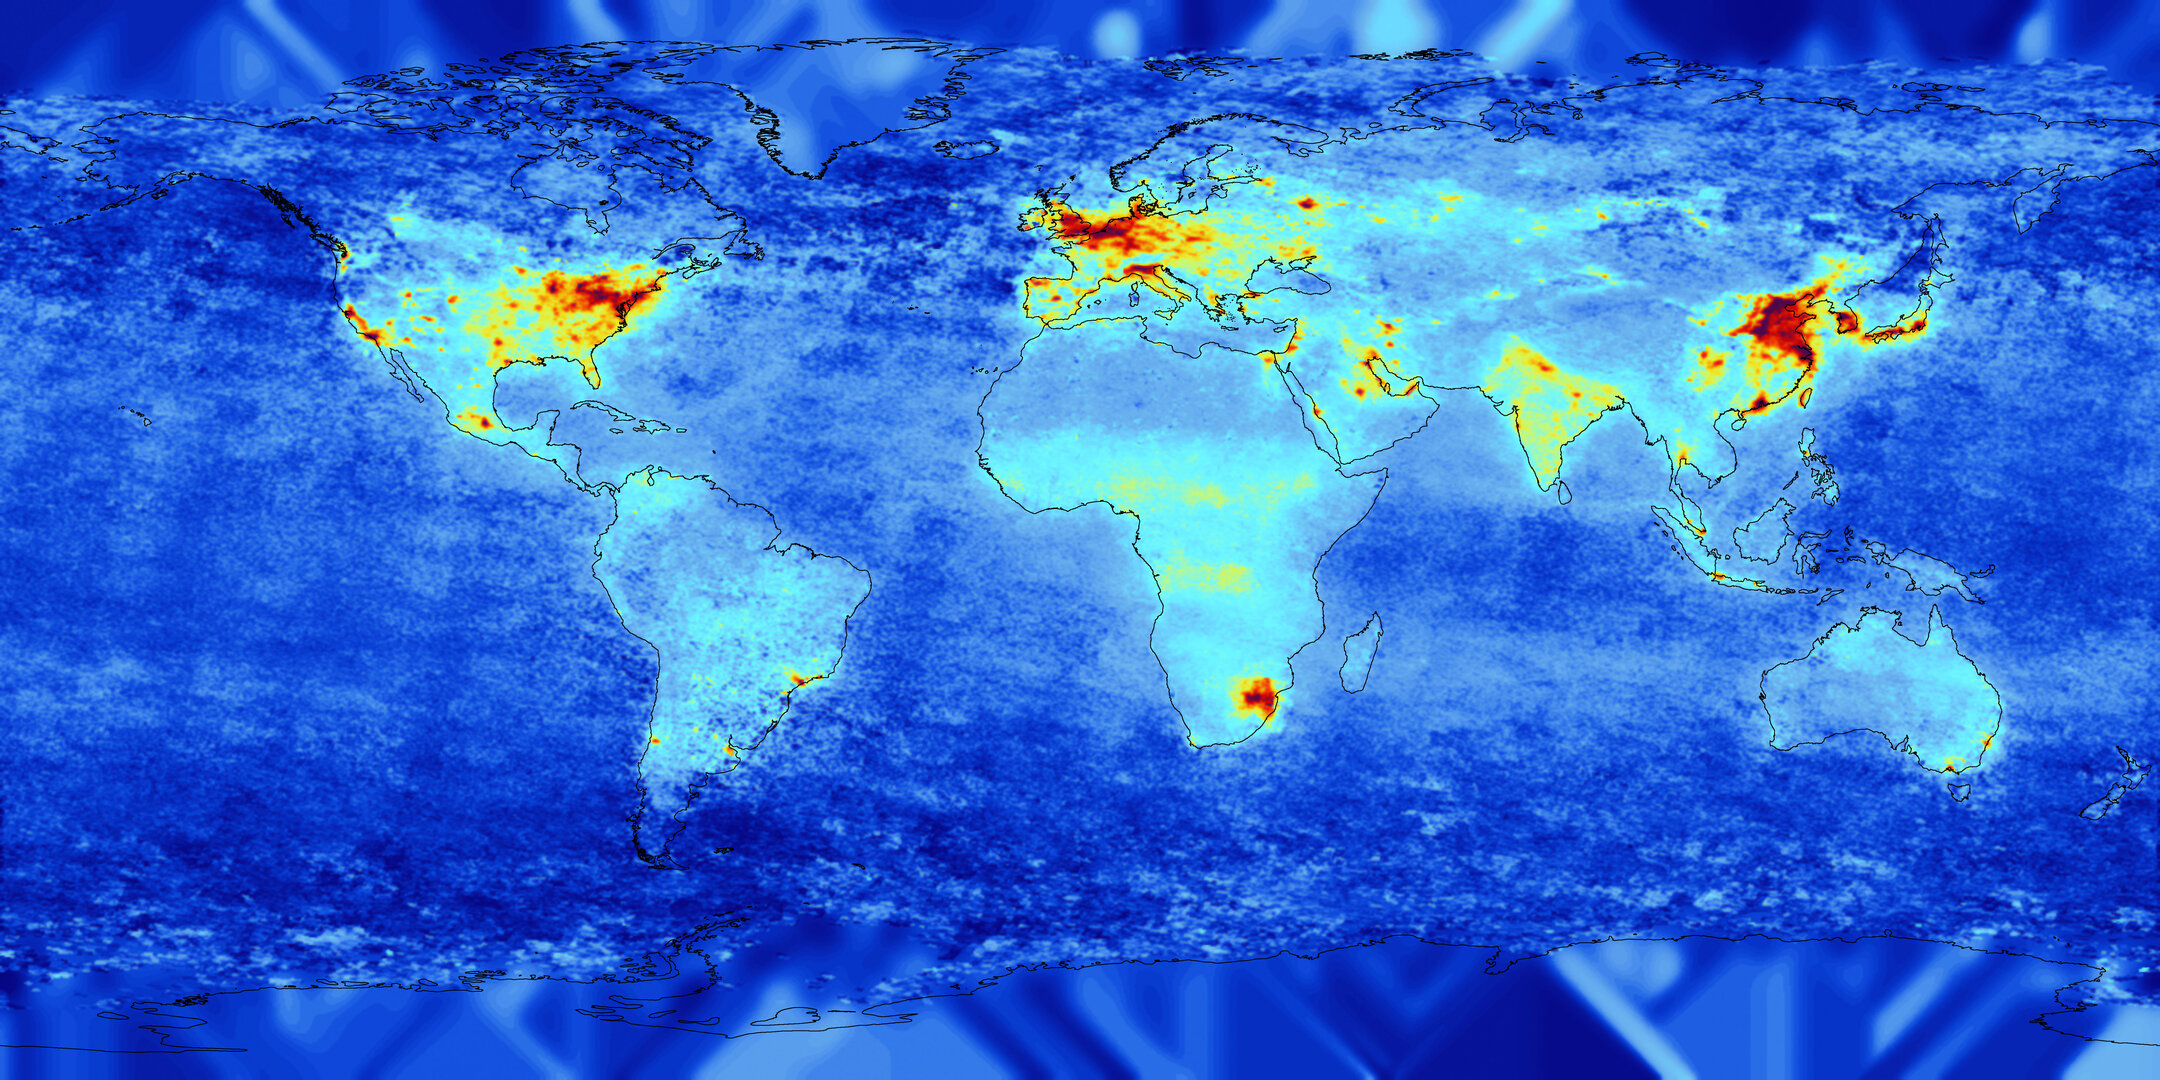 Satellite measurements showing nitrogen dioxide (NO2) as large-scale pollutant. NO2 is produced by burning fossil fuels